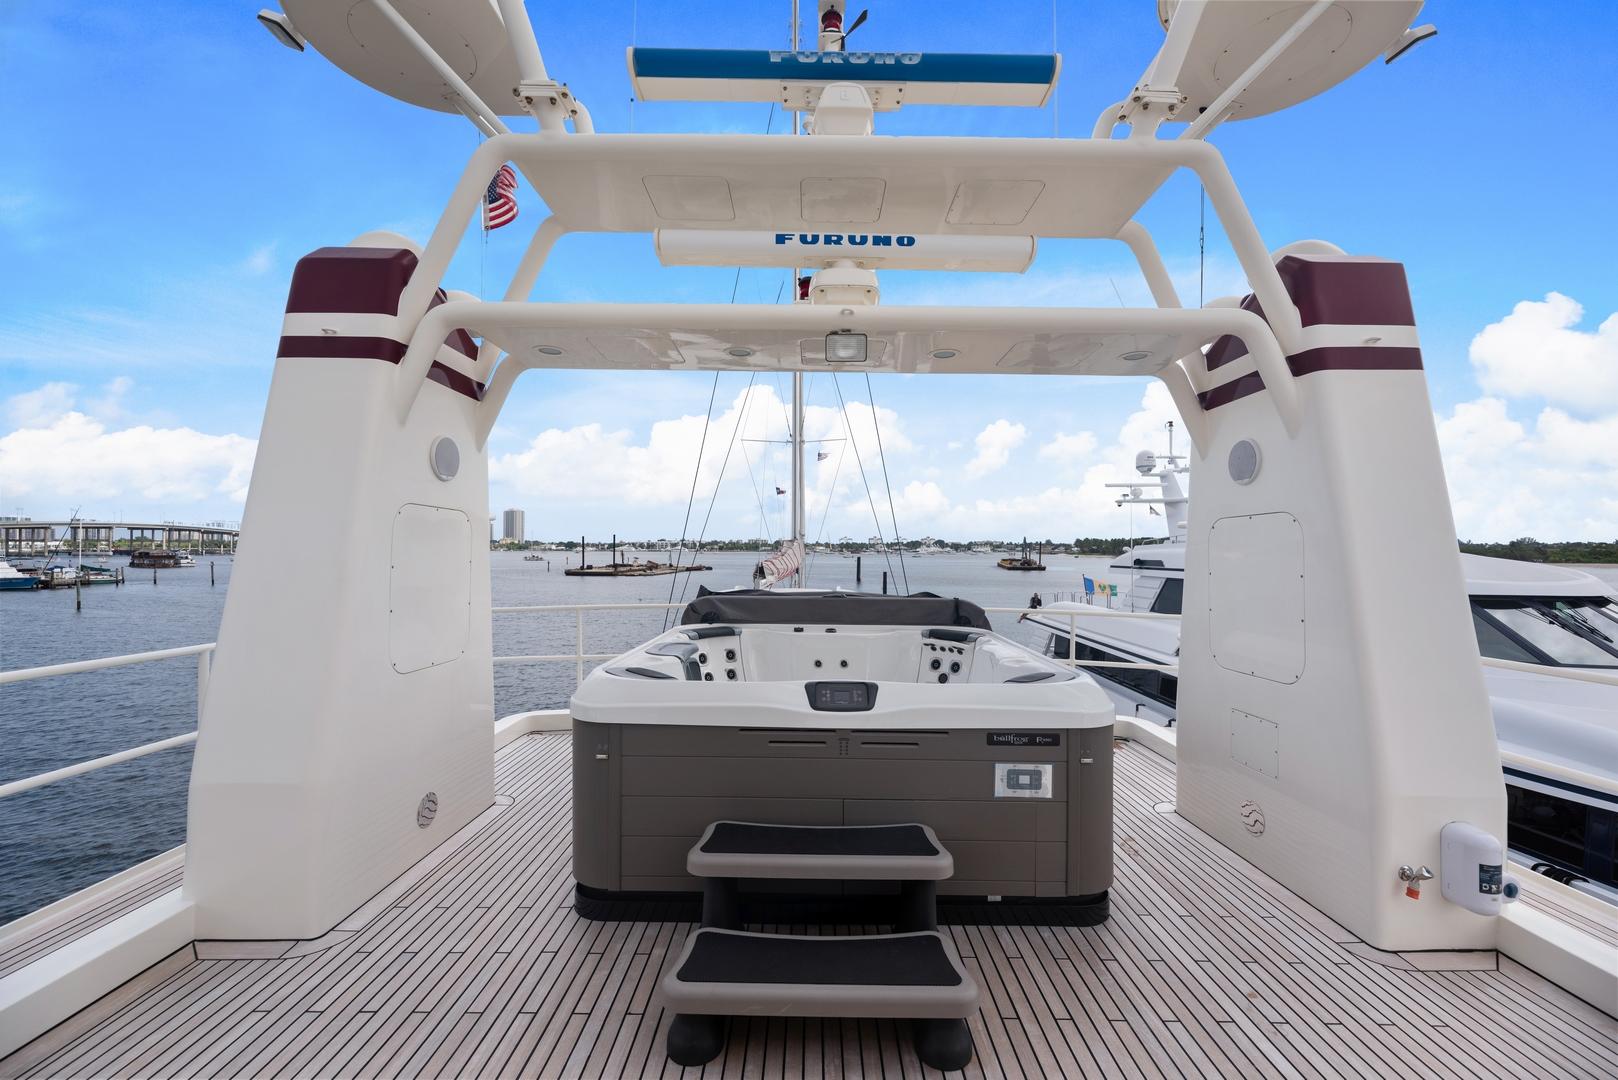 AB Normal 98'10 Inace Exterior, Forward view of Jacuzzi